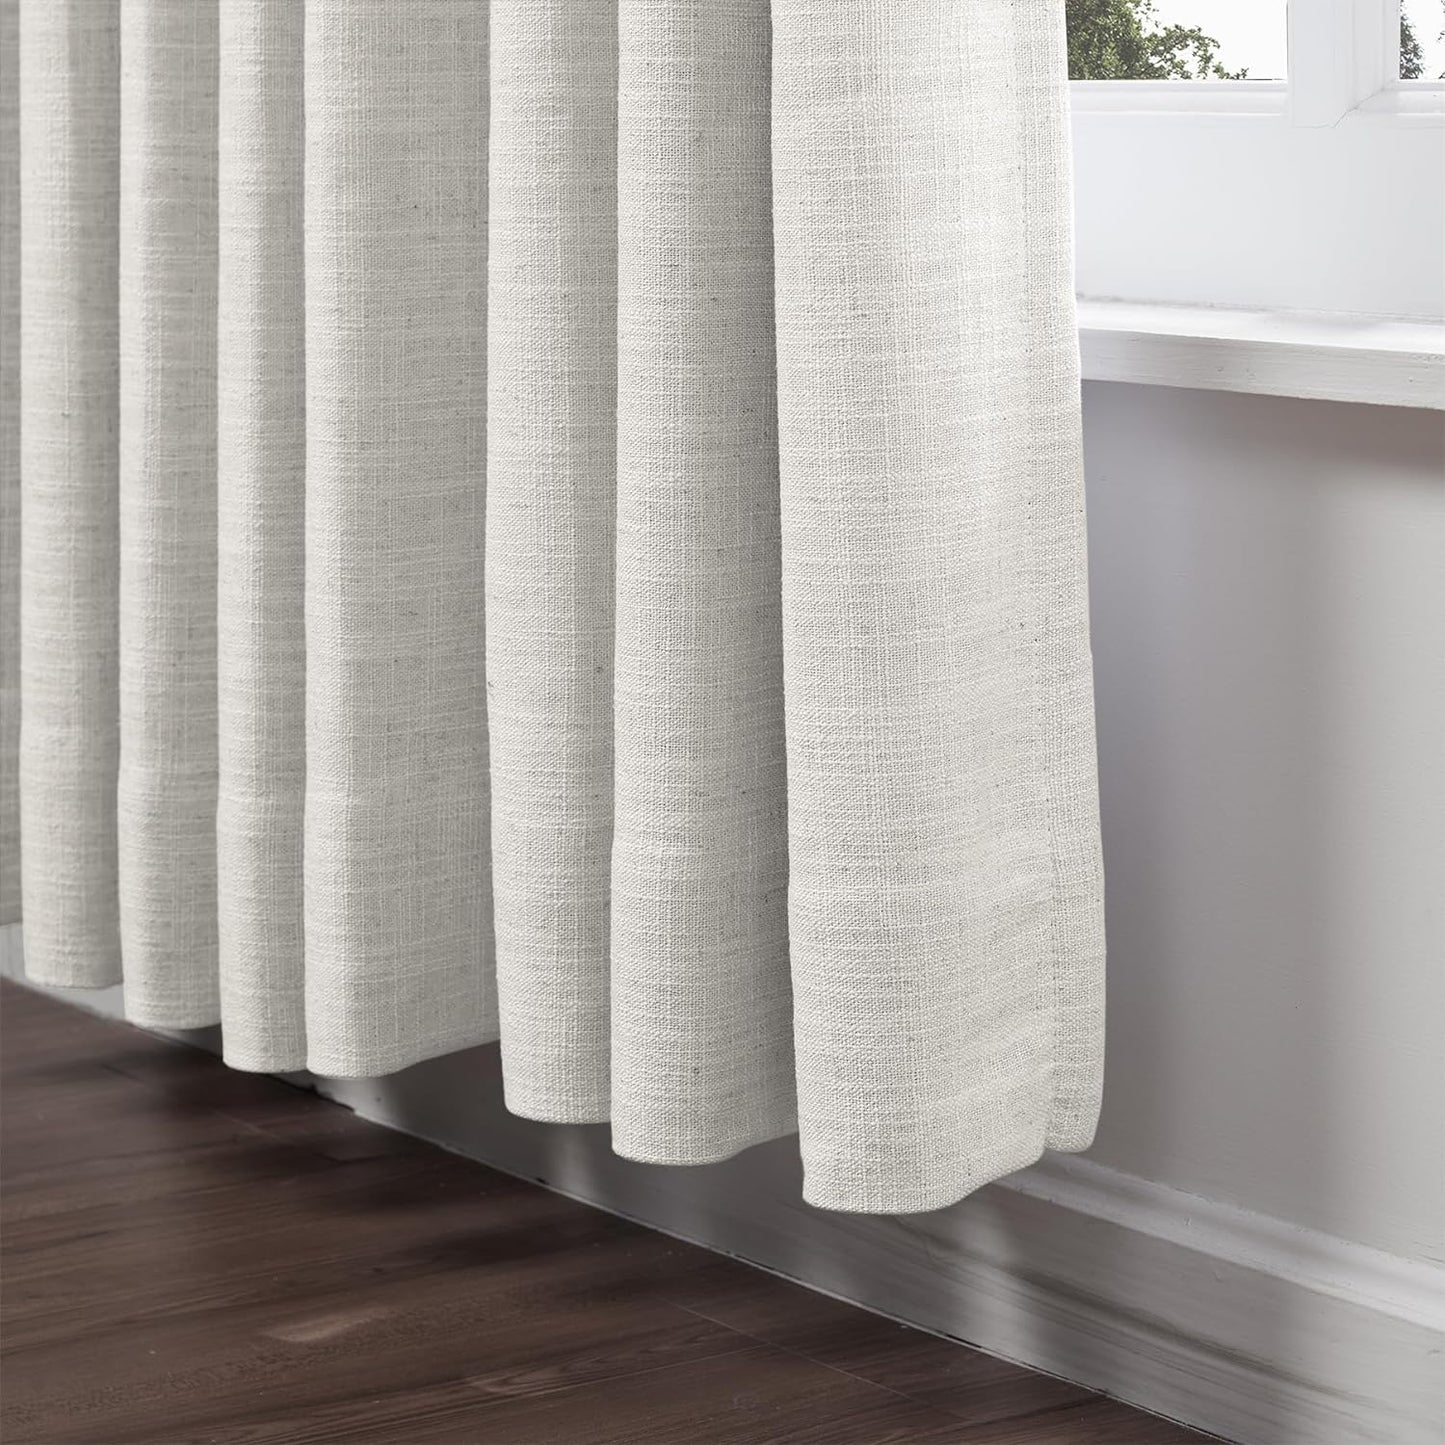 Chadmade 50" W X 84" L Polyester Linen Drape with Blackout Lining Pinch Pleat Curtain for Sliding Door Patio Door Living Room Bedroom, (1 Panel) Beige White Liz Collection  ChadMade   